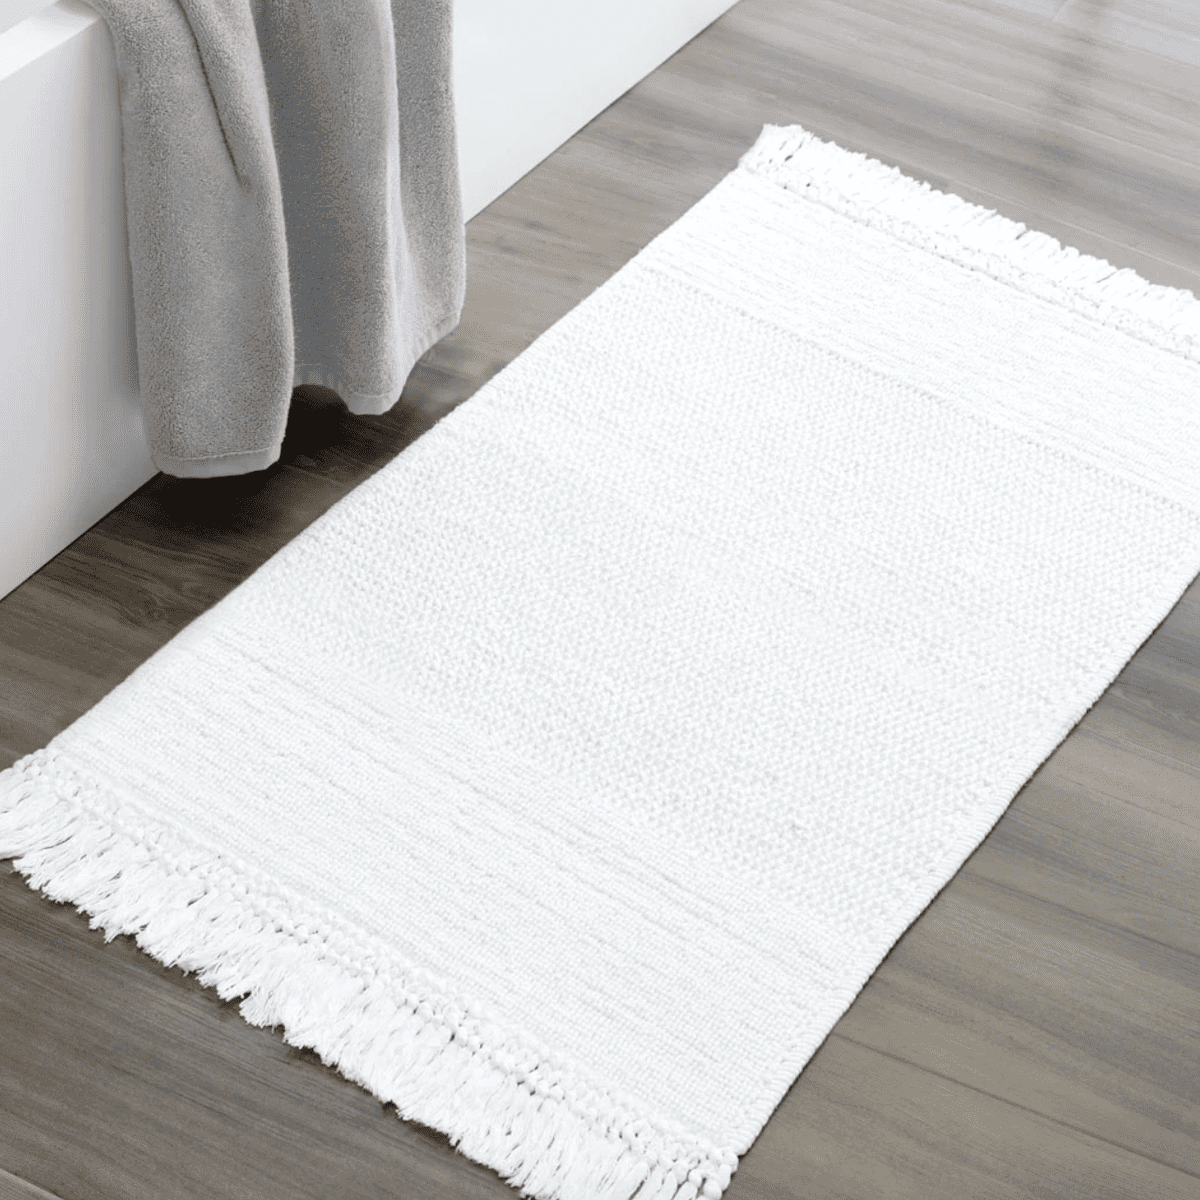 https://cdn.apartmenttherapy.info/image/upload/v1701804599/gen-workflow/product-database/White-Fringed-Textured-Bath-Mat-Crane-Canopy.png